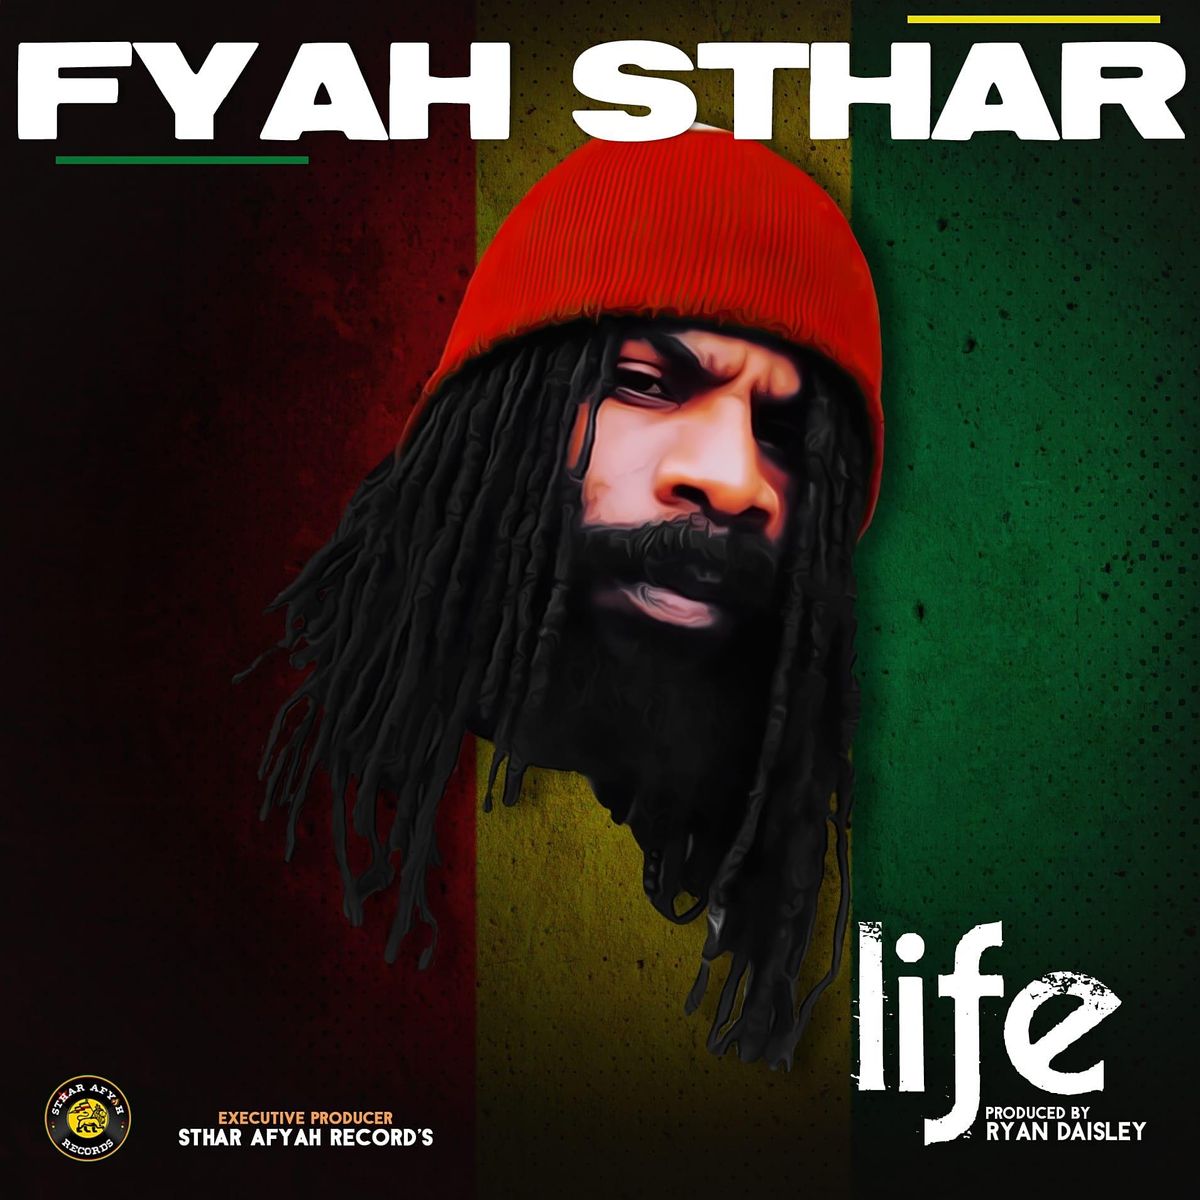 LIFE | Fyah Sthar's Video Shoot & After Party